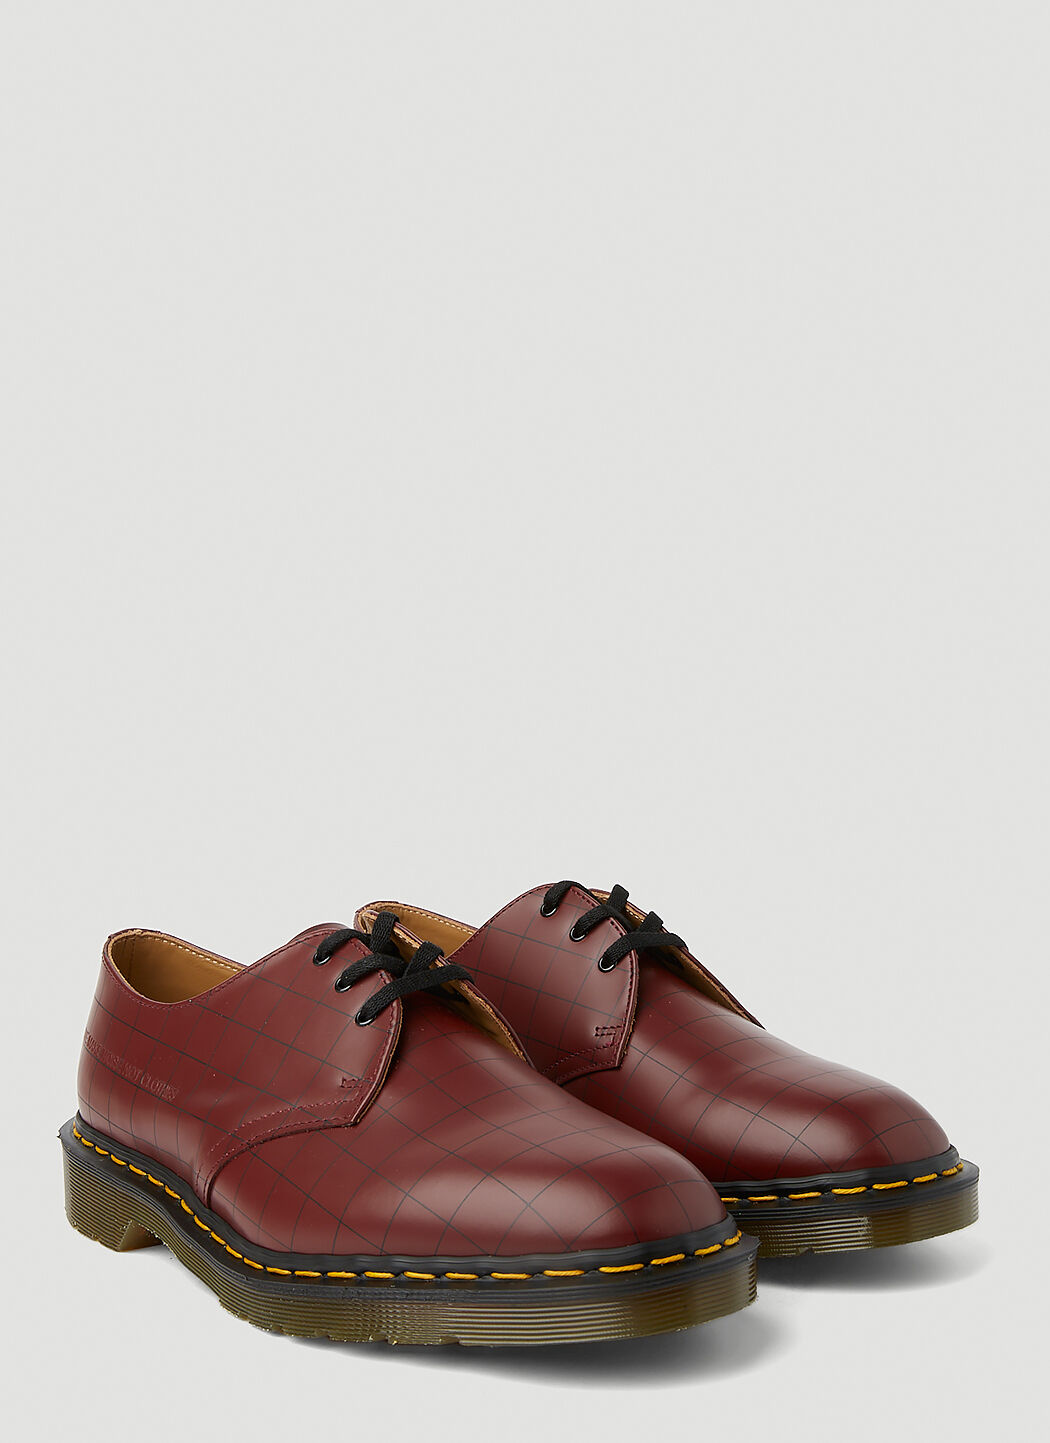 1461 Undercover Brogues